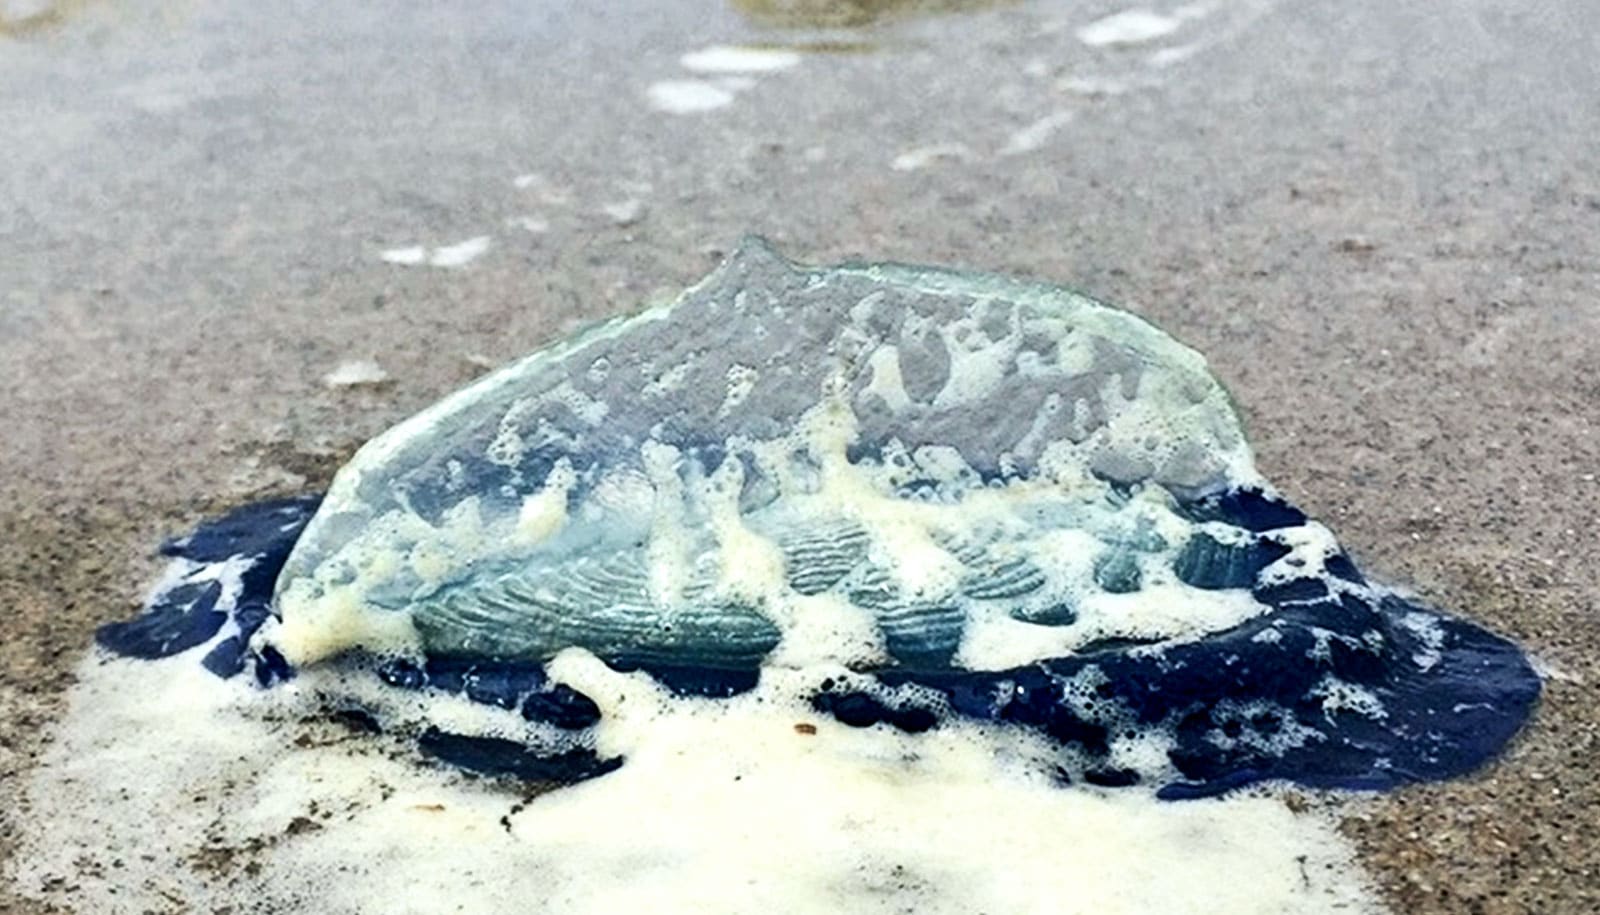 A by-the-wind sailor jellyfish washed up on shore, covered in sea foam, with it's translucent "sail" pointed upwards